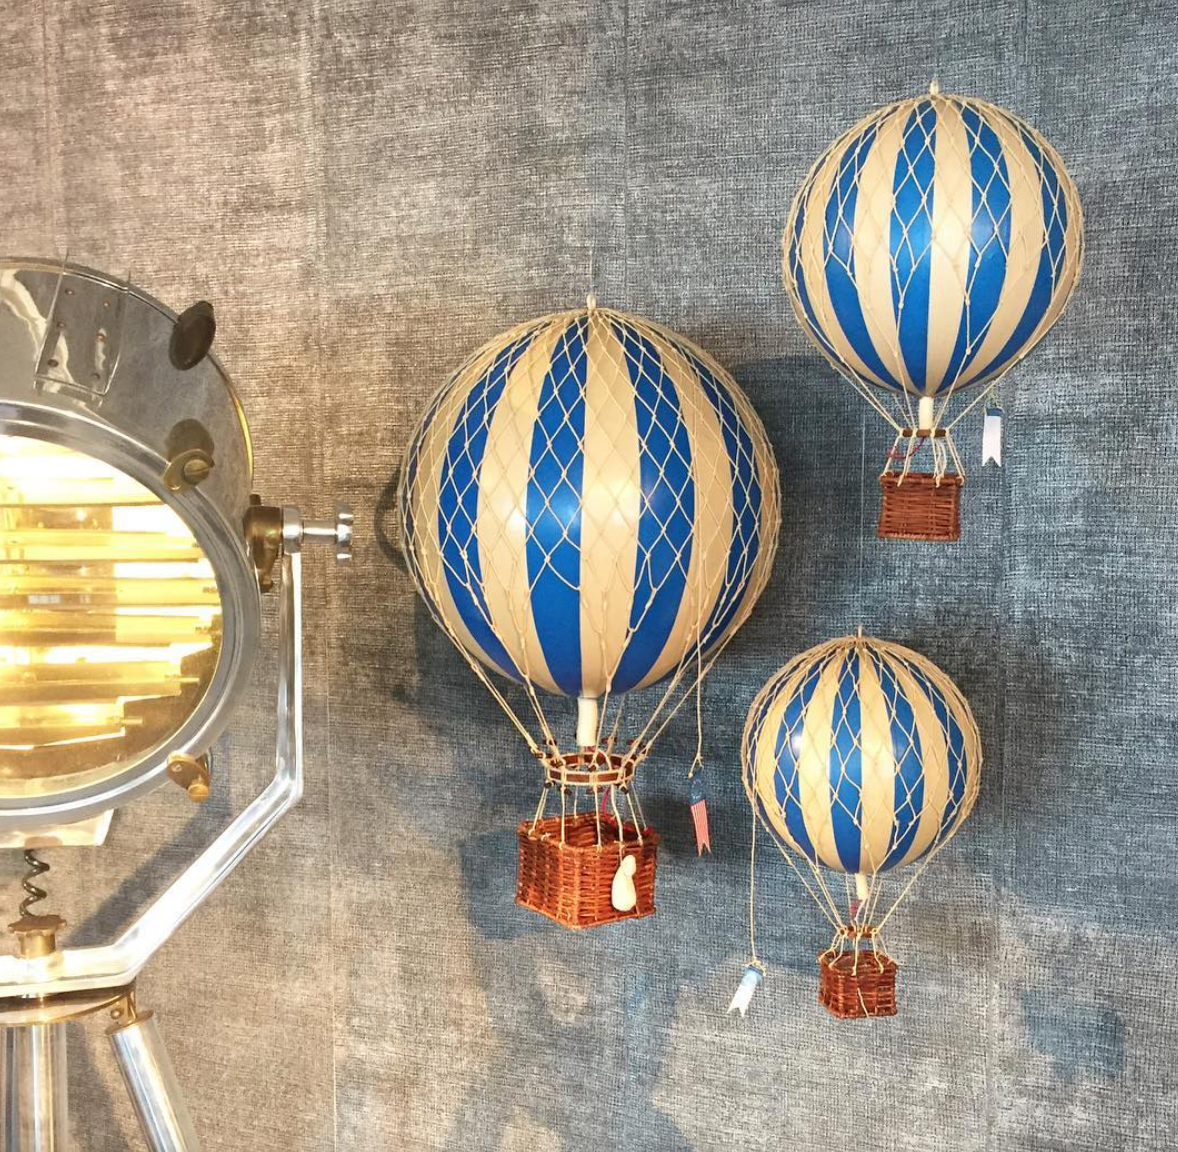 Decorative Hot Air Balloons - Comes with String and Hook - ApolloBox